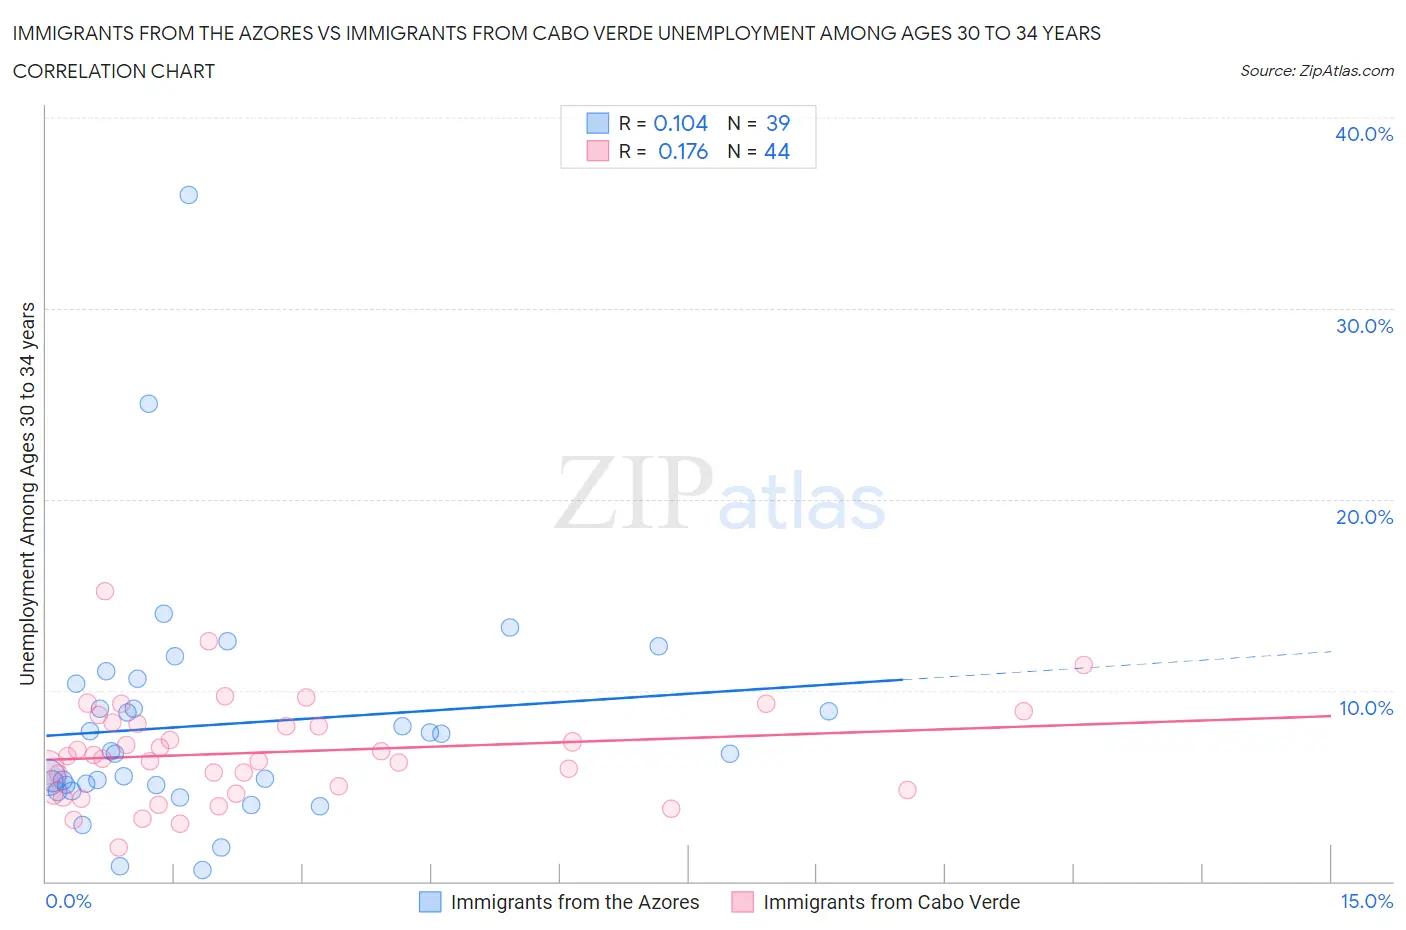 Immigrants from the Azores vs Immigrants from Cabo Verde Unemployment Among Ages 30 to 34 years